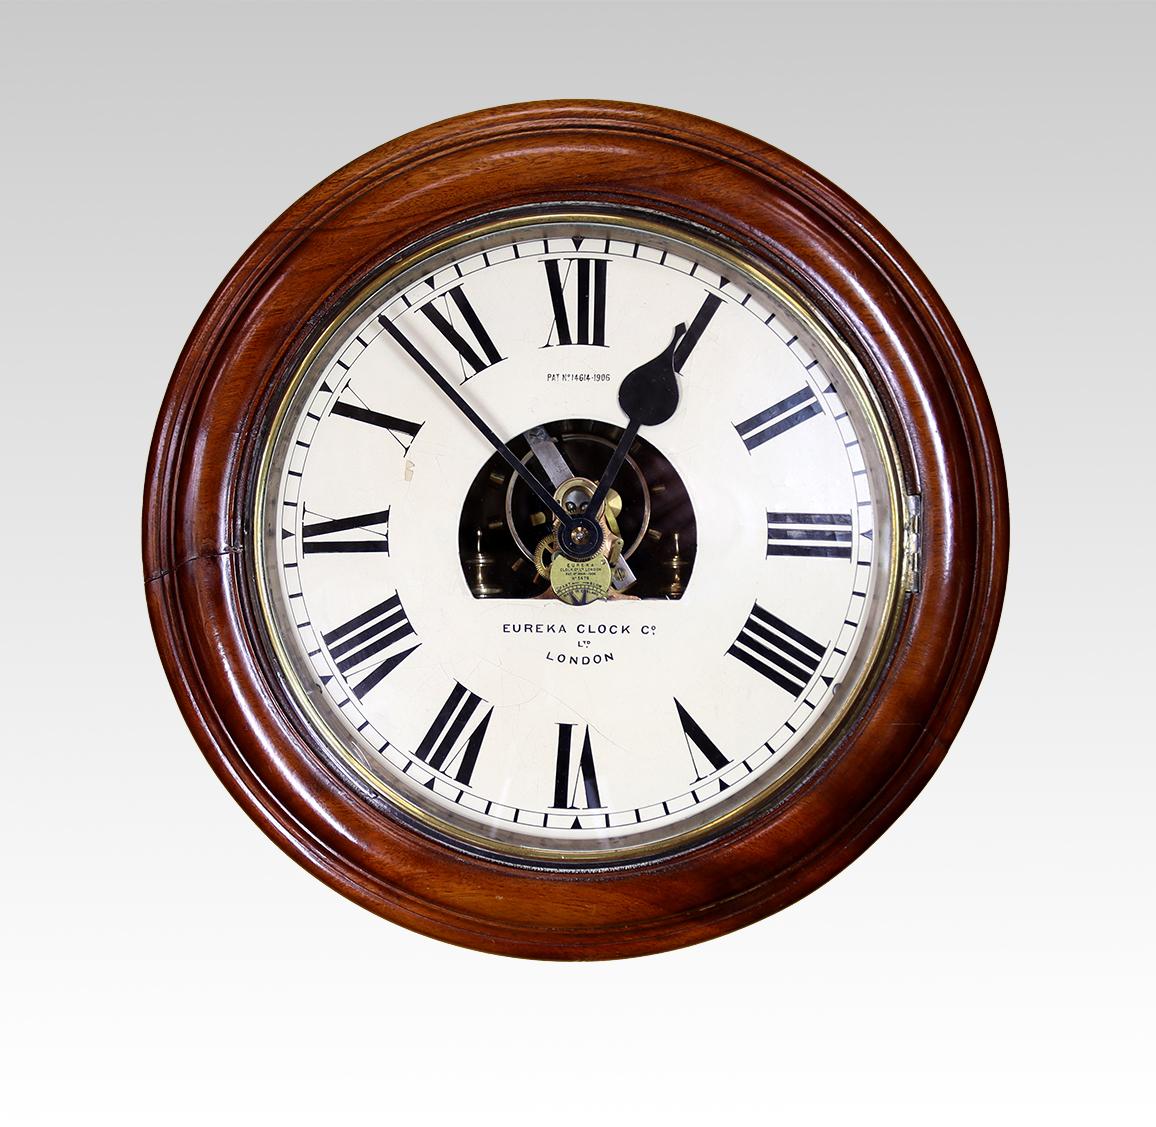 A superb example of a Eureka wall clock made c1911.

The electromagnetic movement is regulated by a large, slowly oscillating bi-metallic balance wheel, with the correct battery these clock will run for the duration of the battery life. Housed in a